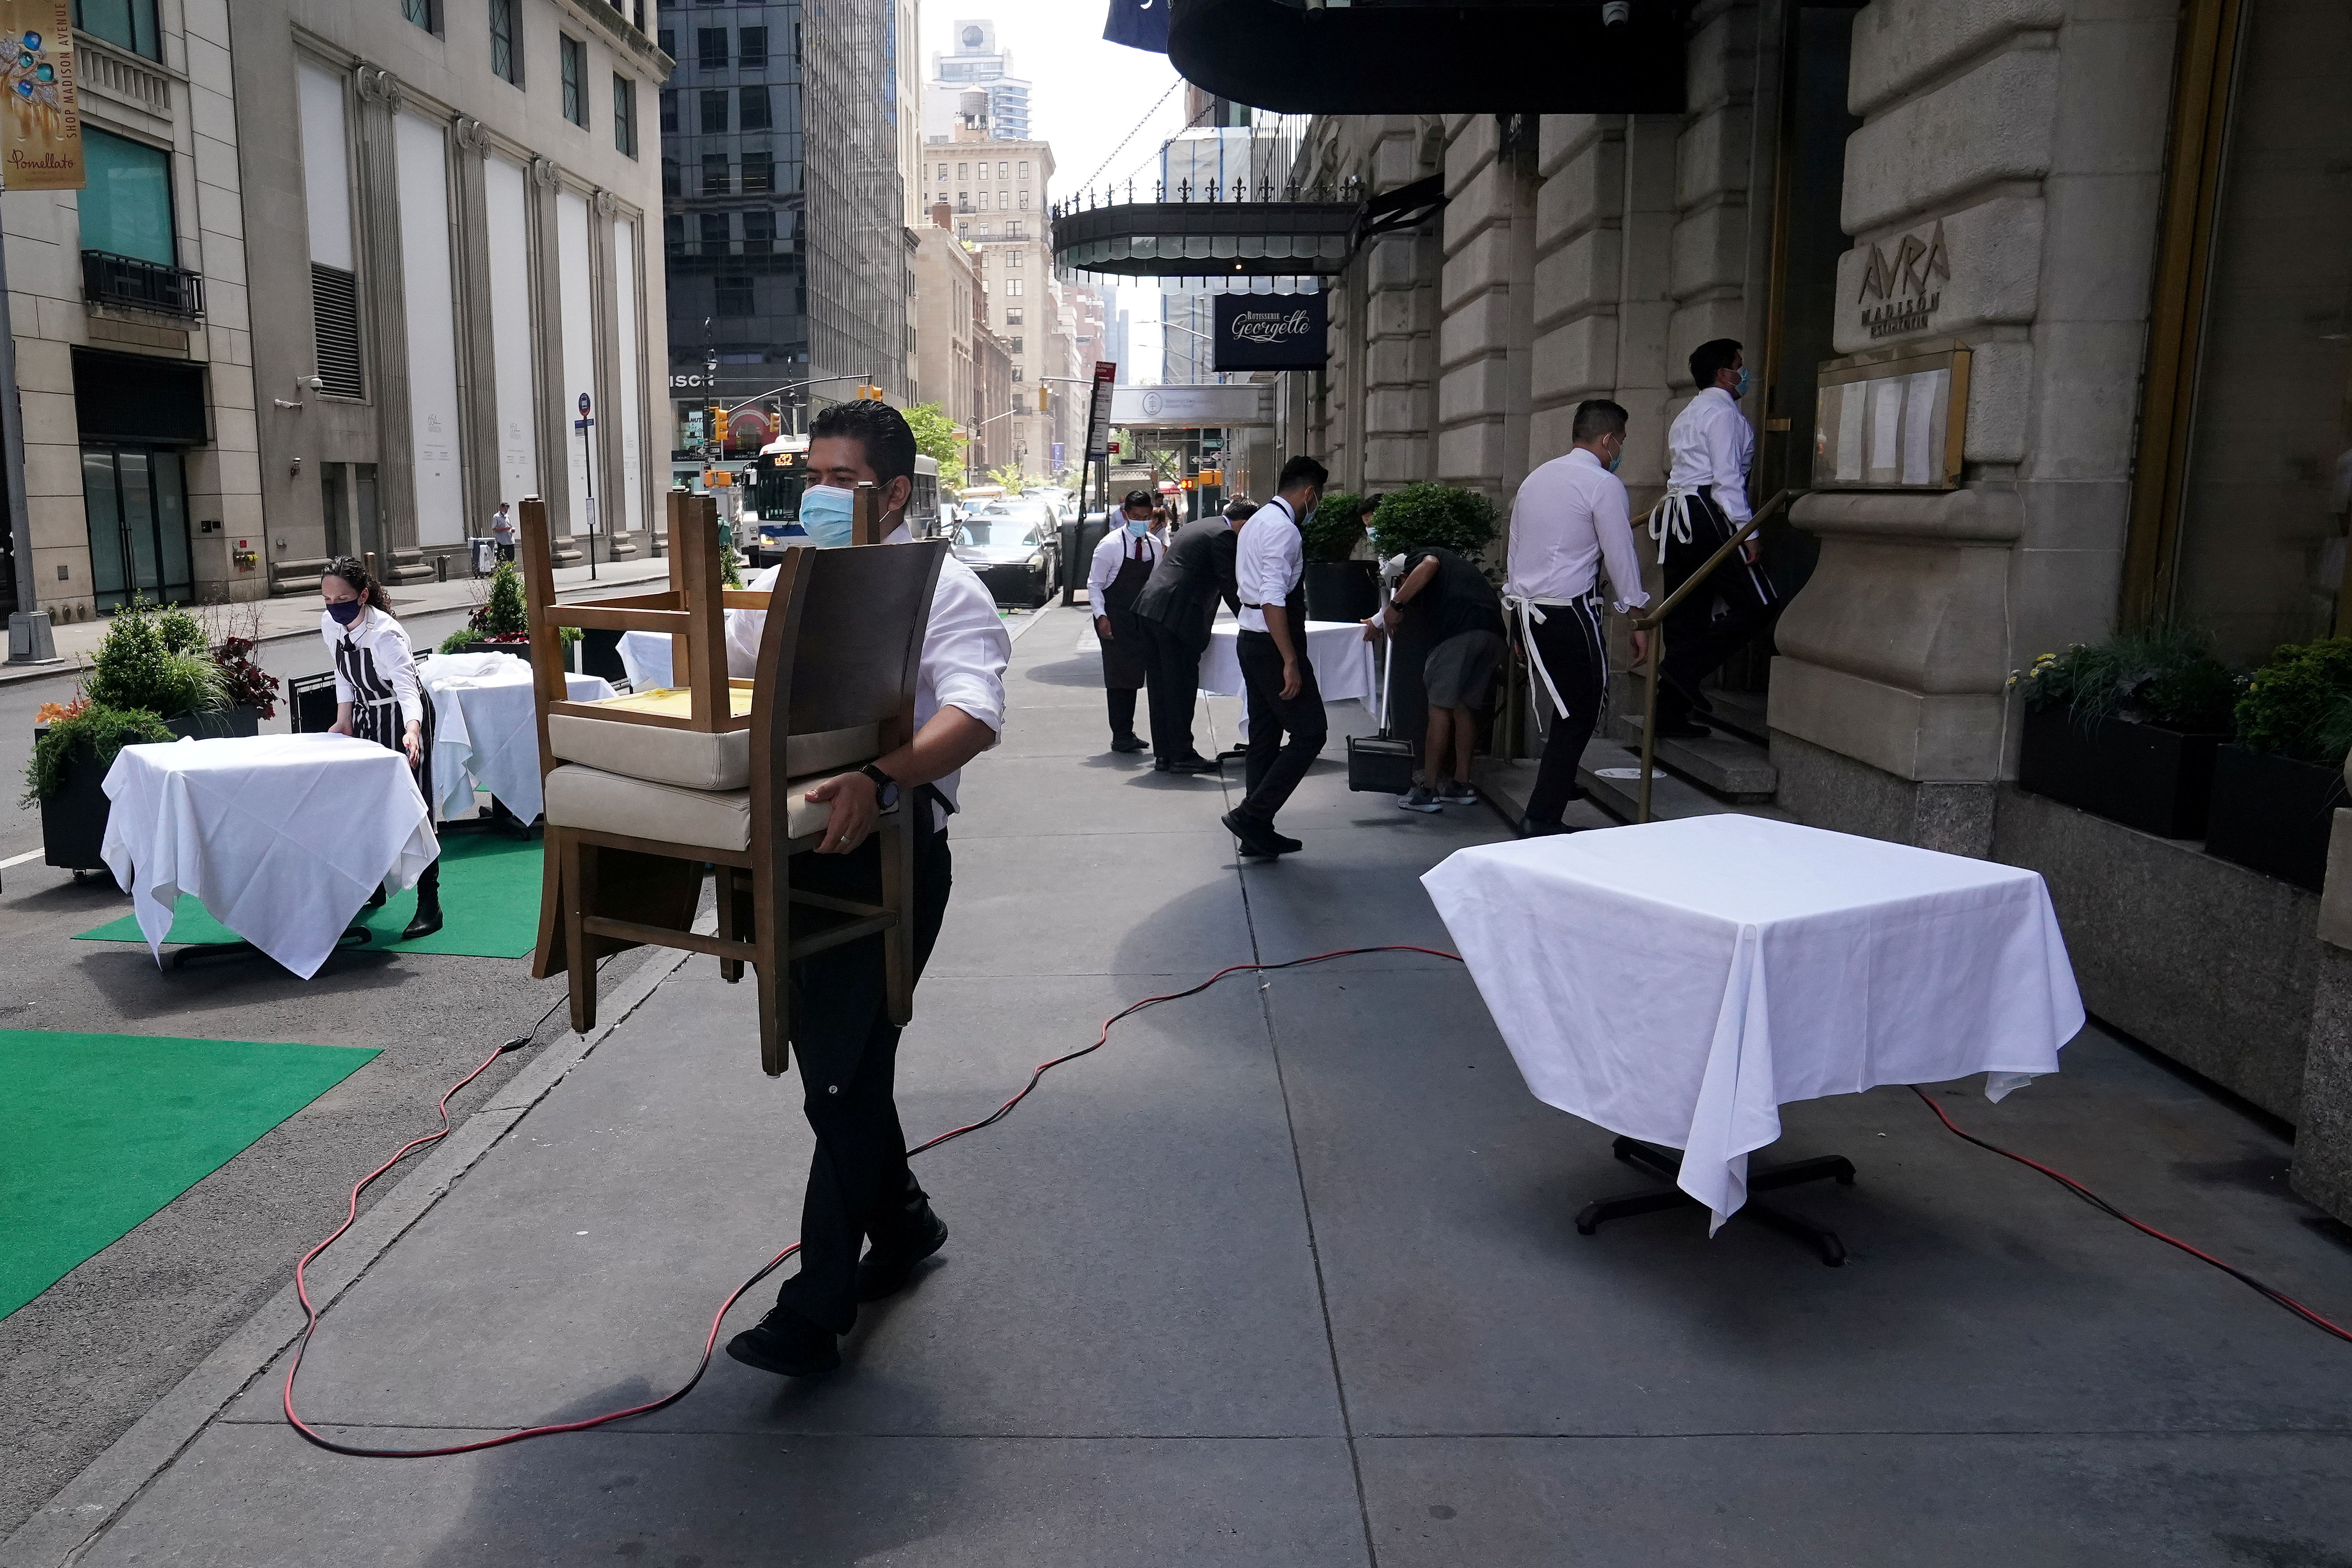 A waiter sets up tables in front of a restaurant on a street on the first day of the phase two re-opening of businesses following the outbreak of the coronavirus disease (COVID-19), in the Manhattan borough of New York City